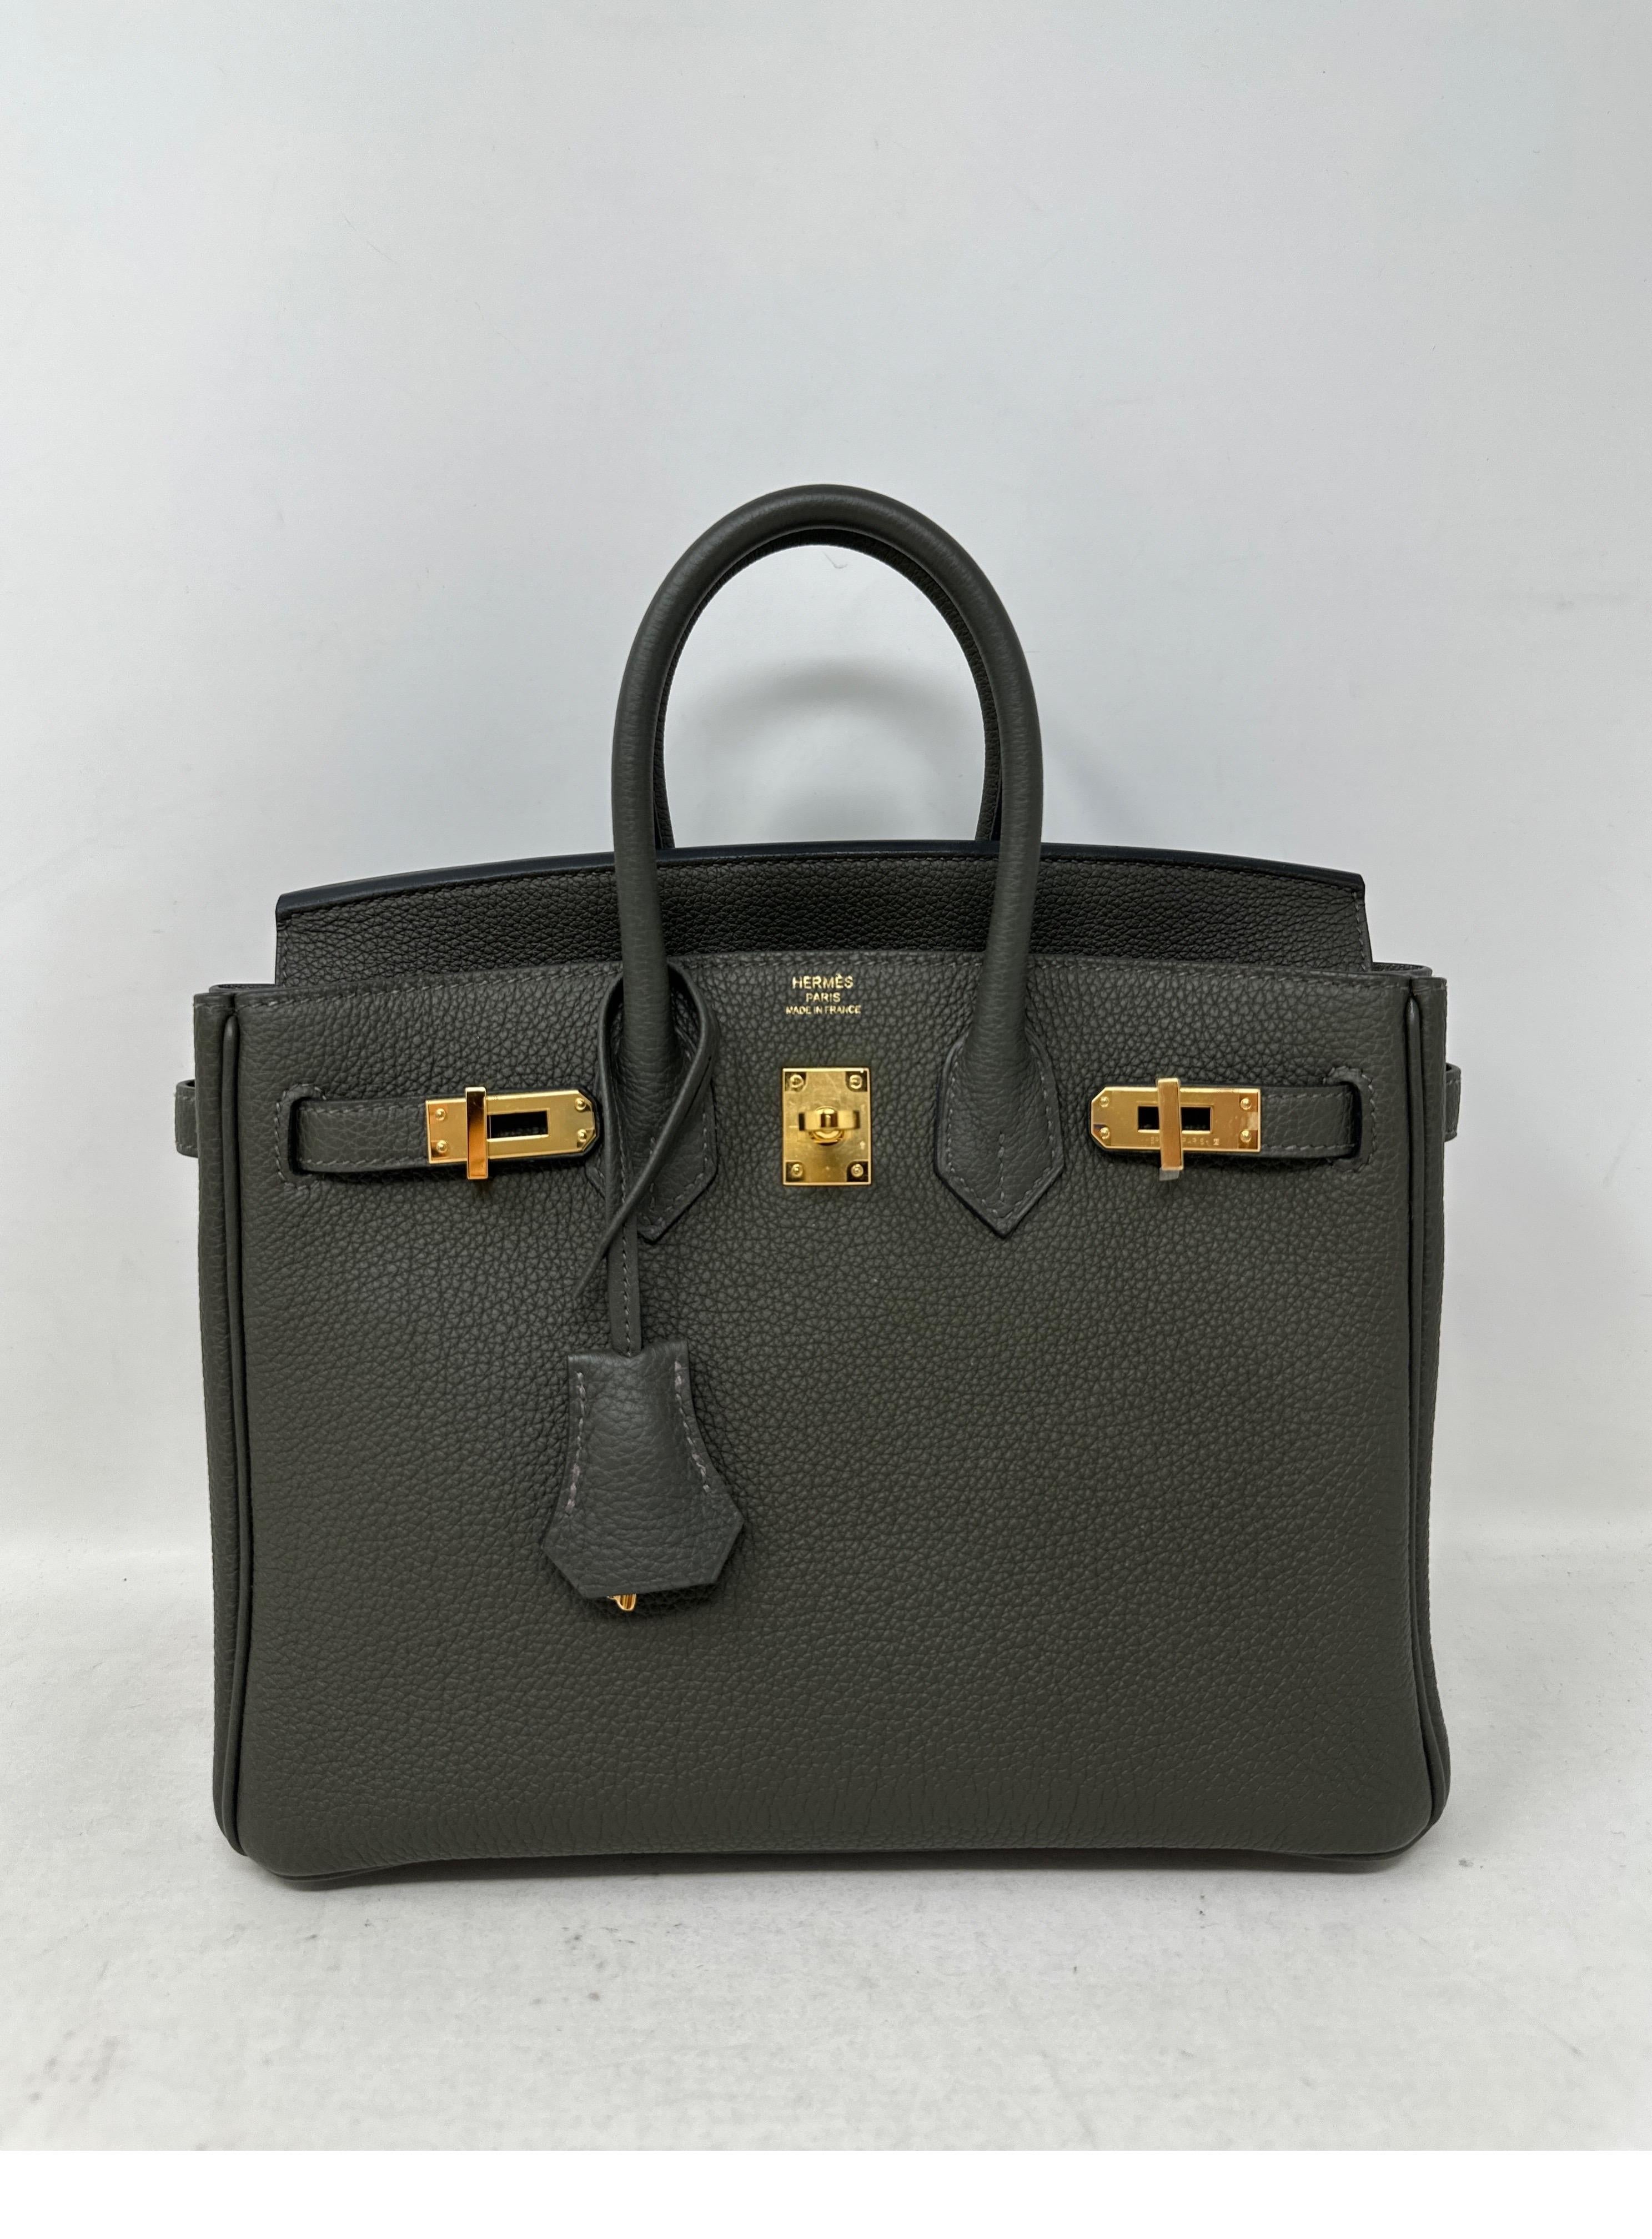 Hermes Vert De Gris Birkin 25 Bag. Brand new Birkin 25. Almost impossible to get size. Gold hardware. Gorgeous dark grey green color. Mini 25 size. Great evening bag. Or can be worn everyday. Full set. New with clochette, lock, keys, dust bag and